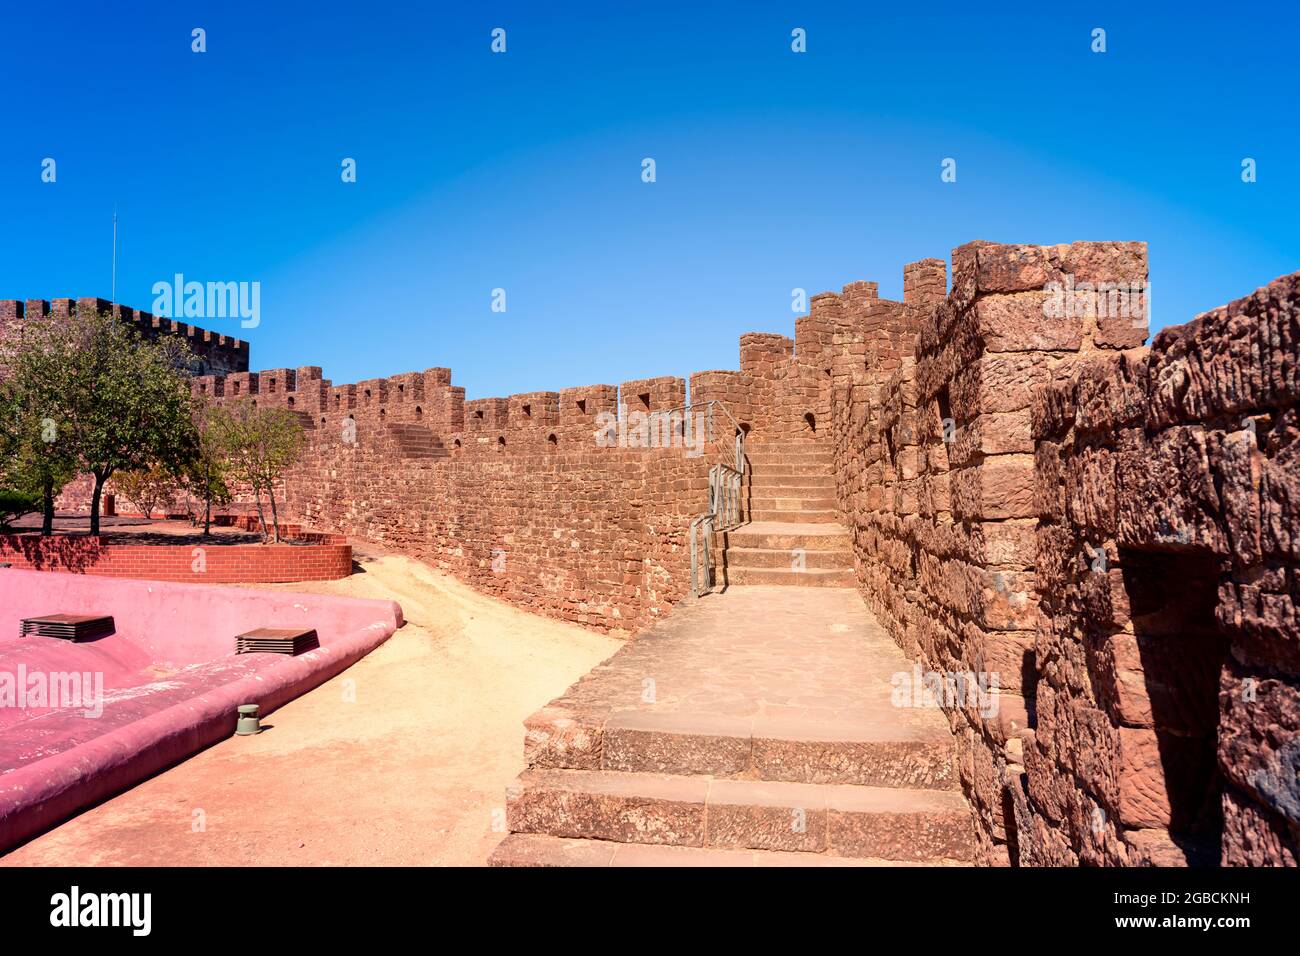 View of the interior and battlements of Silves castle, Castelo de Silves, from within Silves castle, Silves Algarve Portugal. Stock Photo